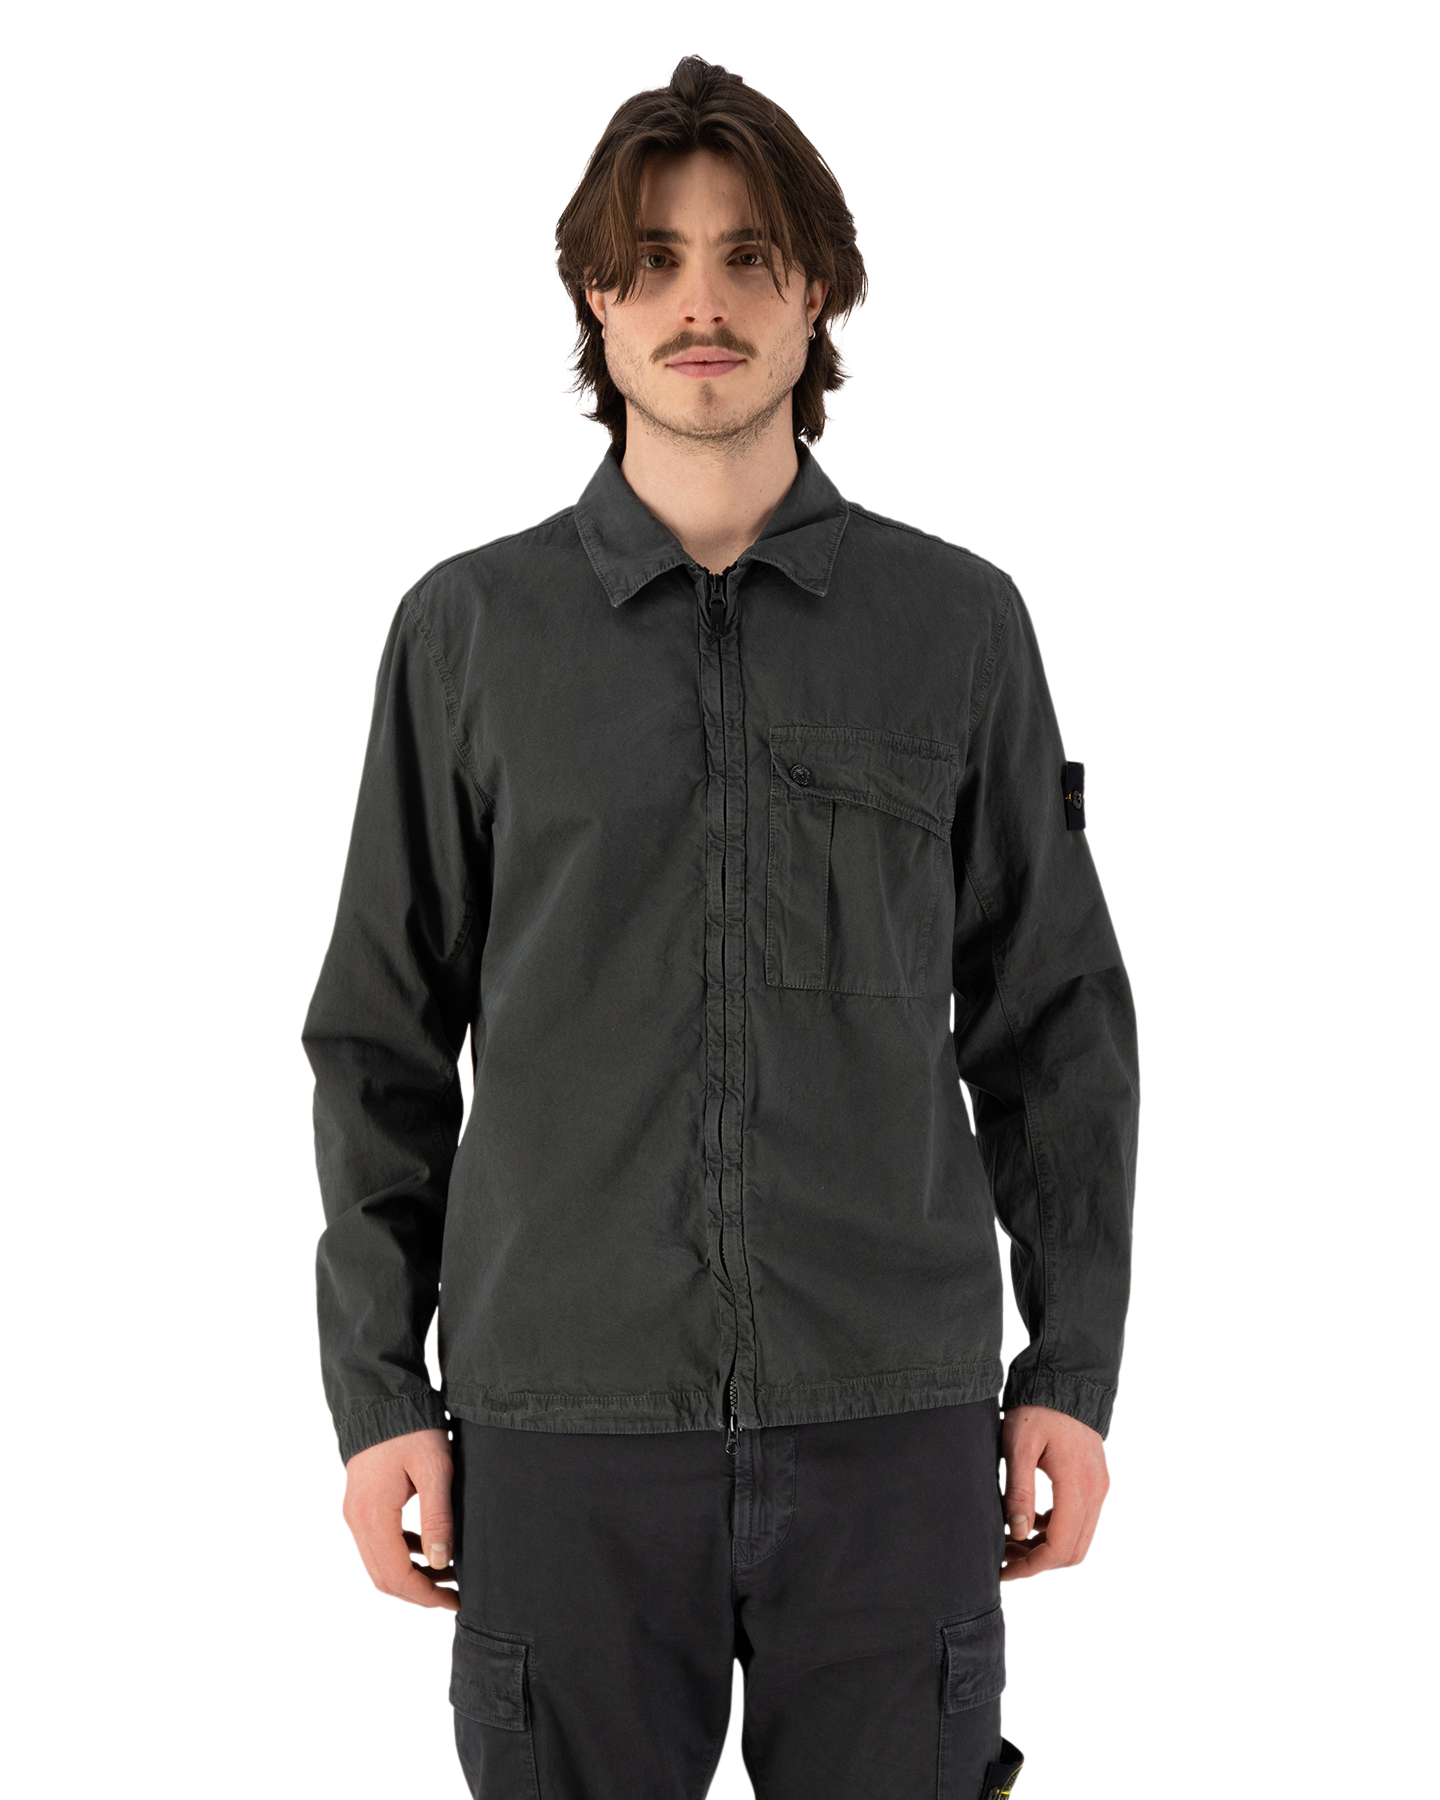 Stone Island 119WN Brushed Organic Cotton Canvas Garment Dyed 'Old' Effect Overshirt GROEN 4